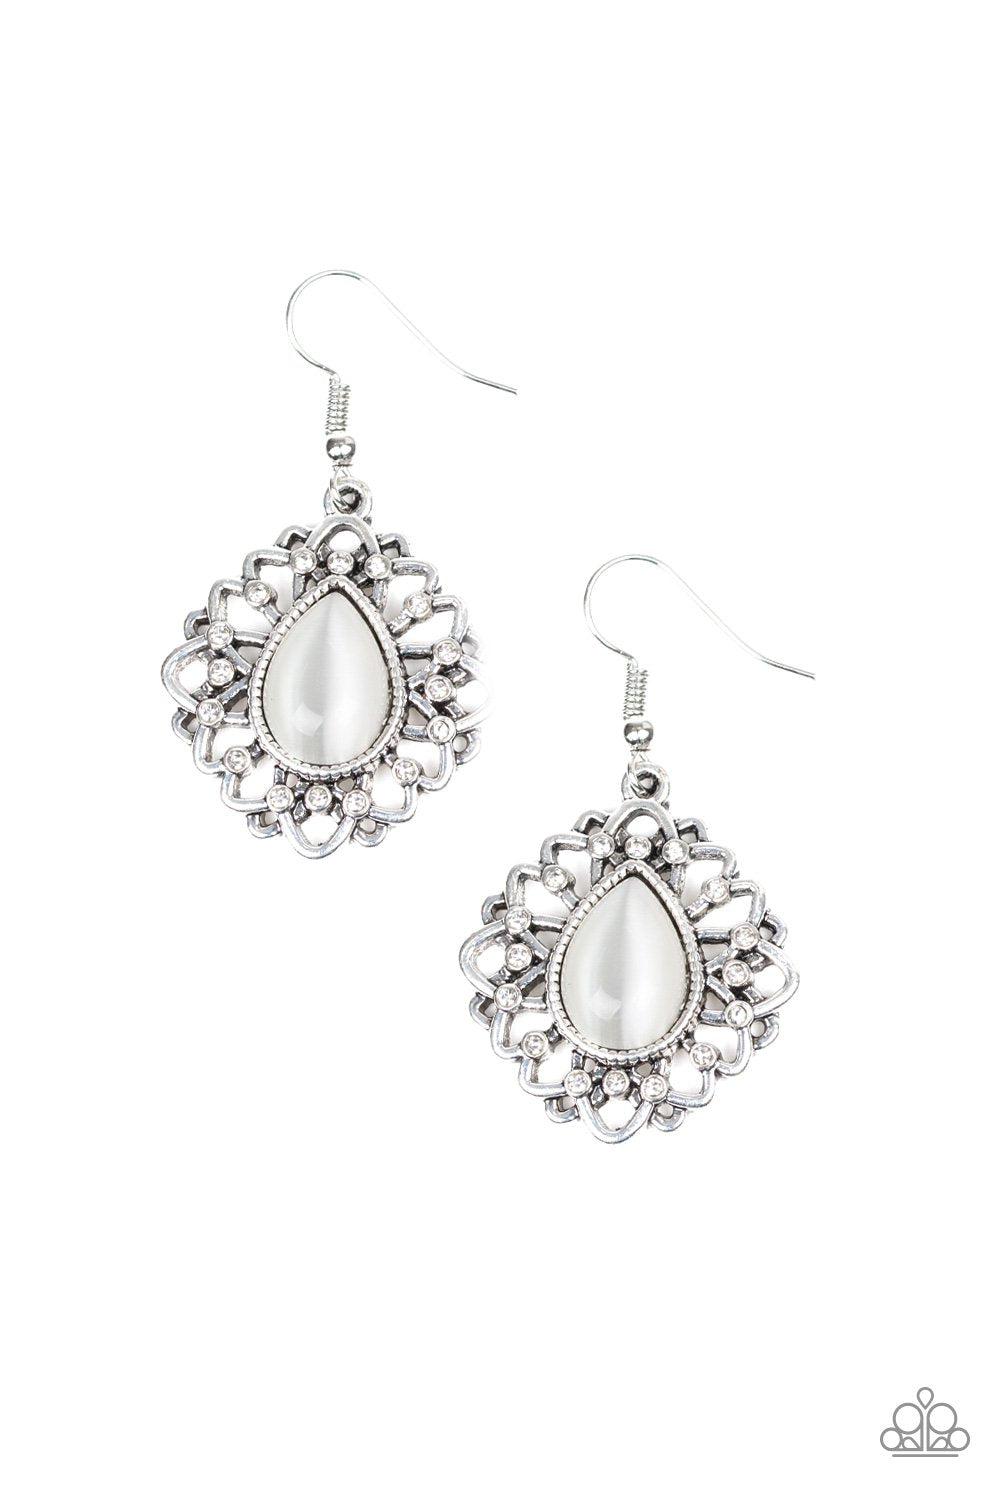 Totally GLOWN Away White Moonstone Earrings - Paparazzi Accessories-CarasShop.com - $5 Jewelry by Cara Jewels